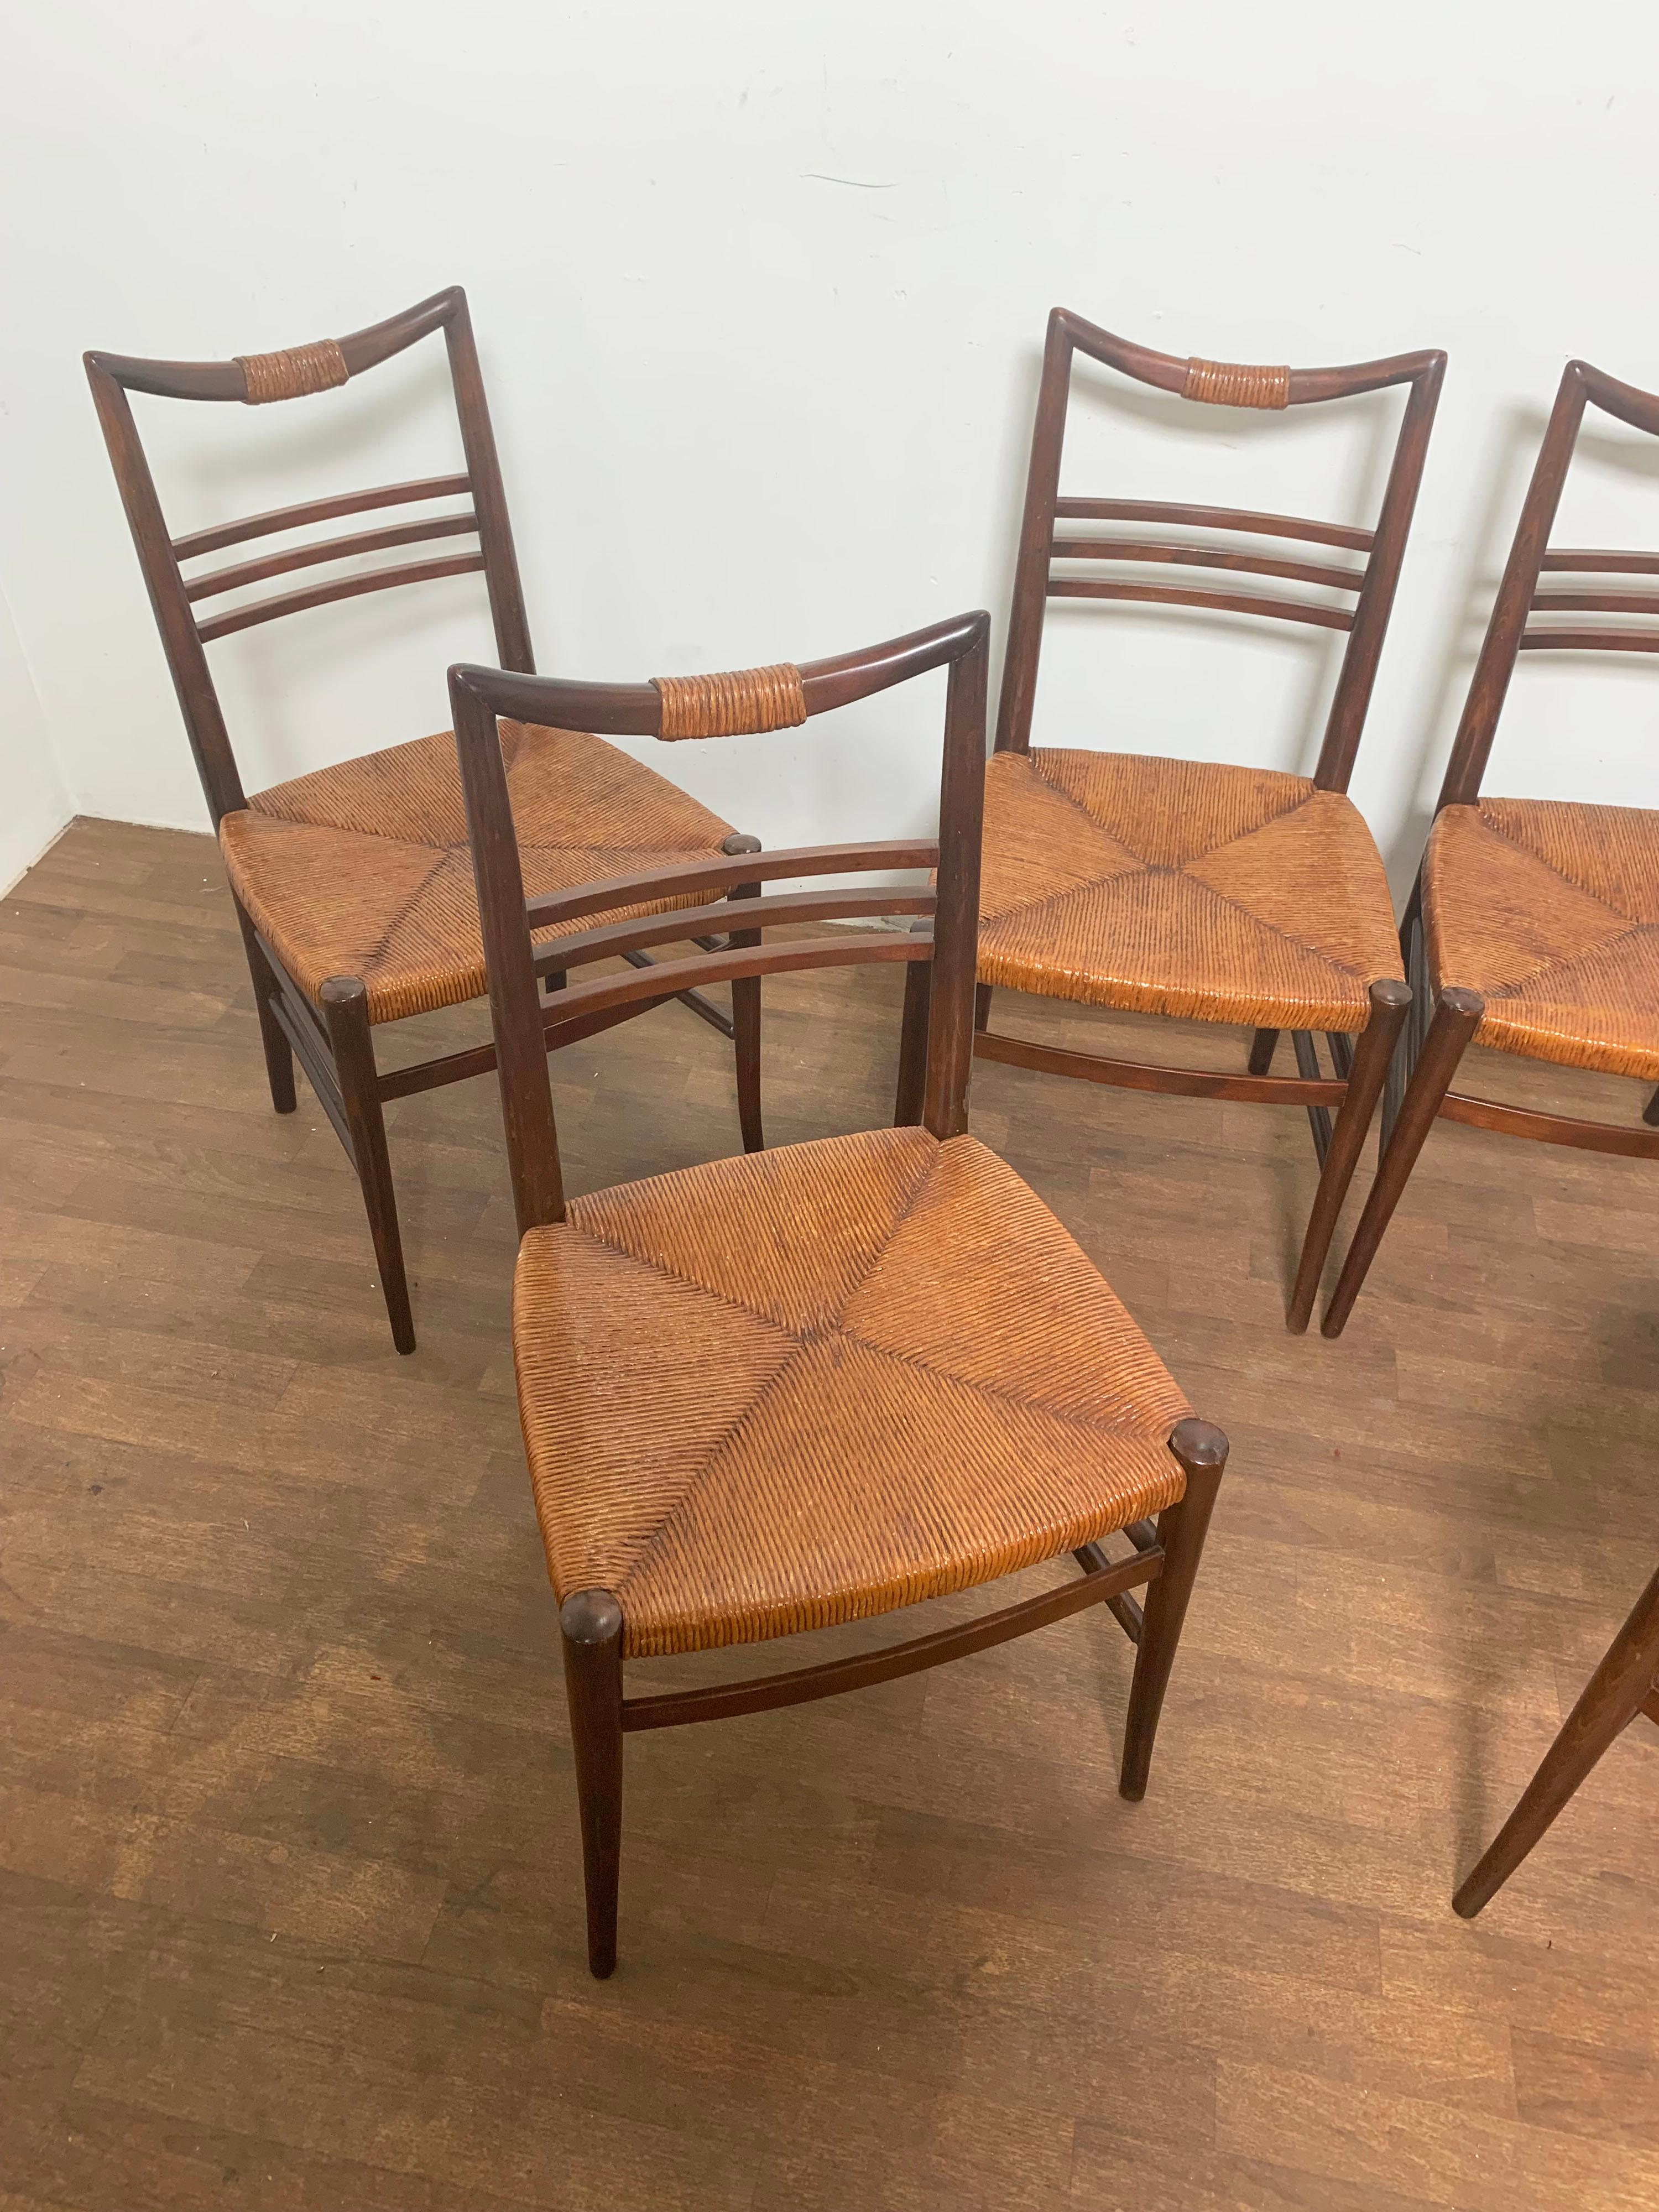 Set of six mid century Italian dining chairs with corded seats made for Otto Gerdau, ca. 1950s.